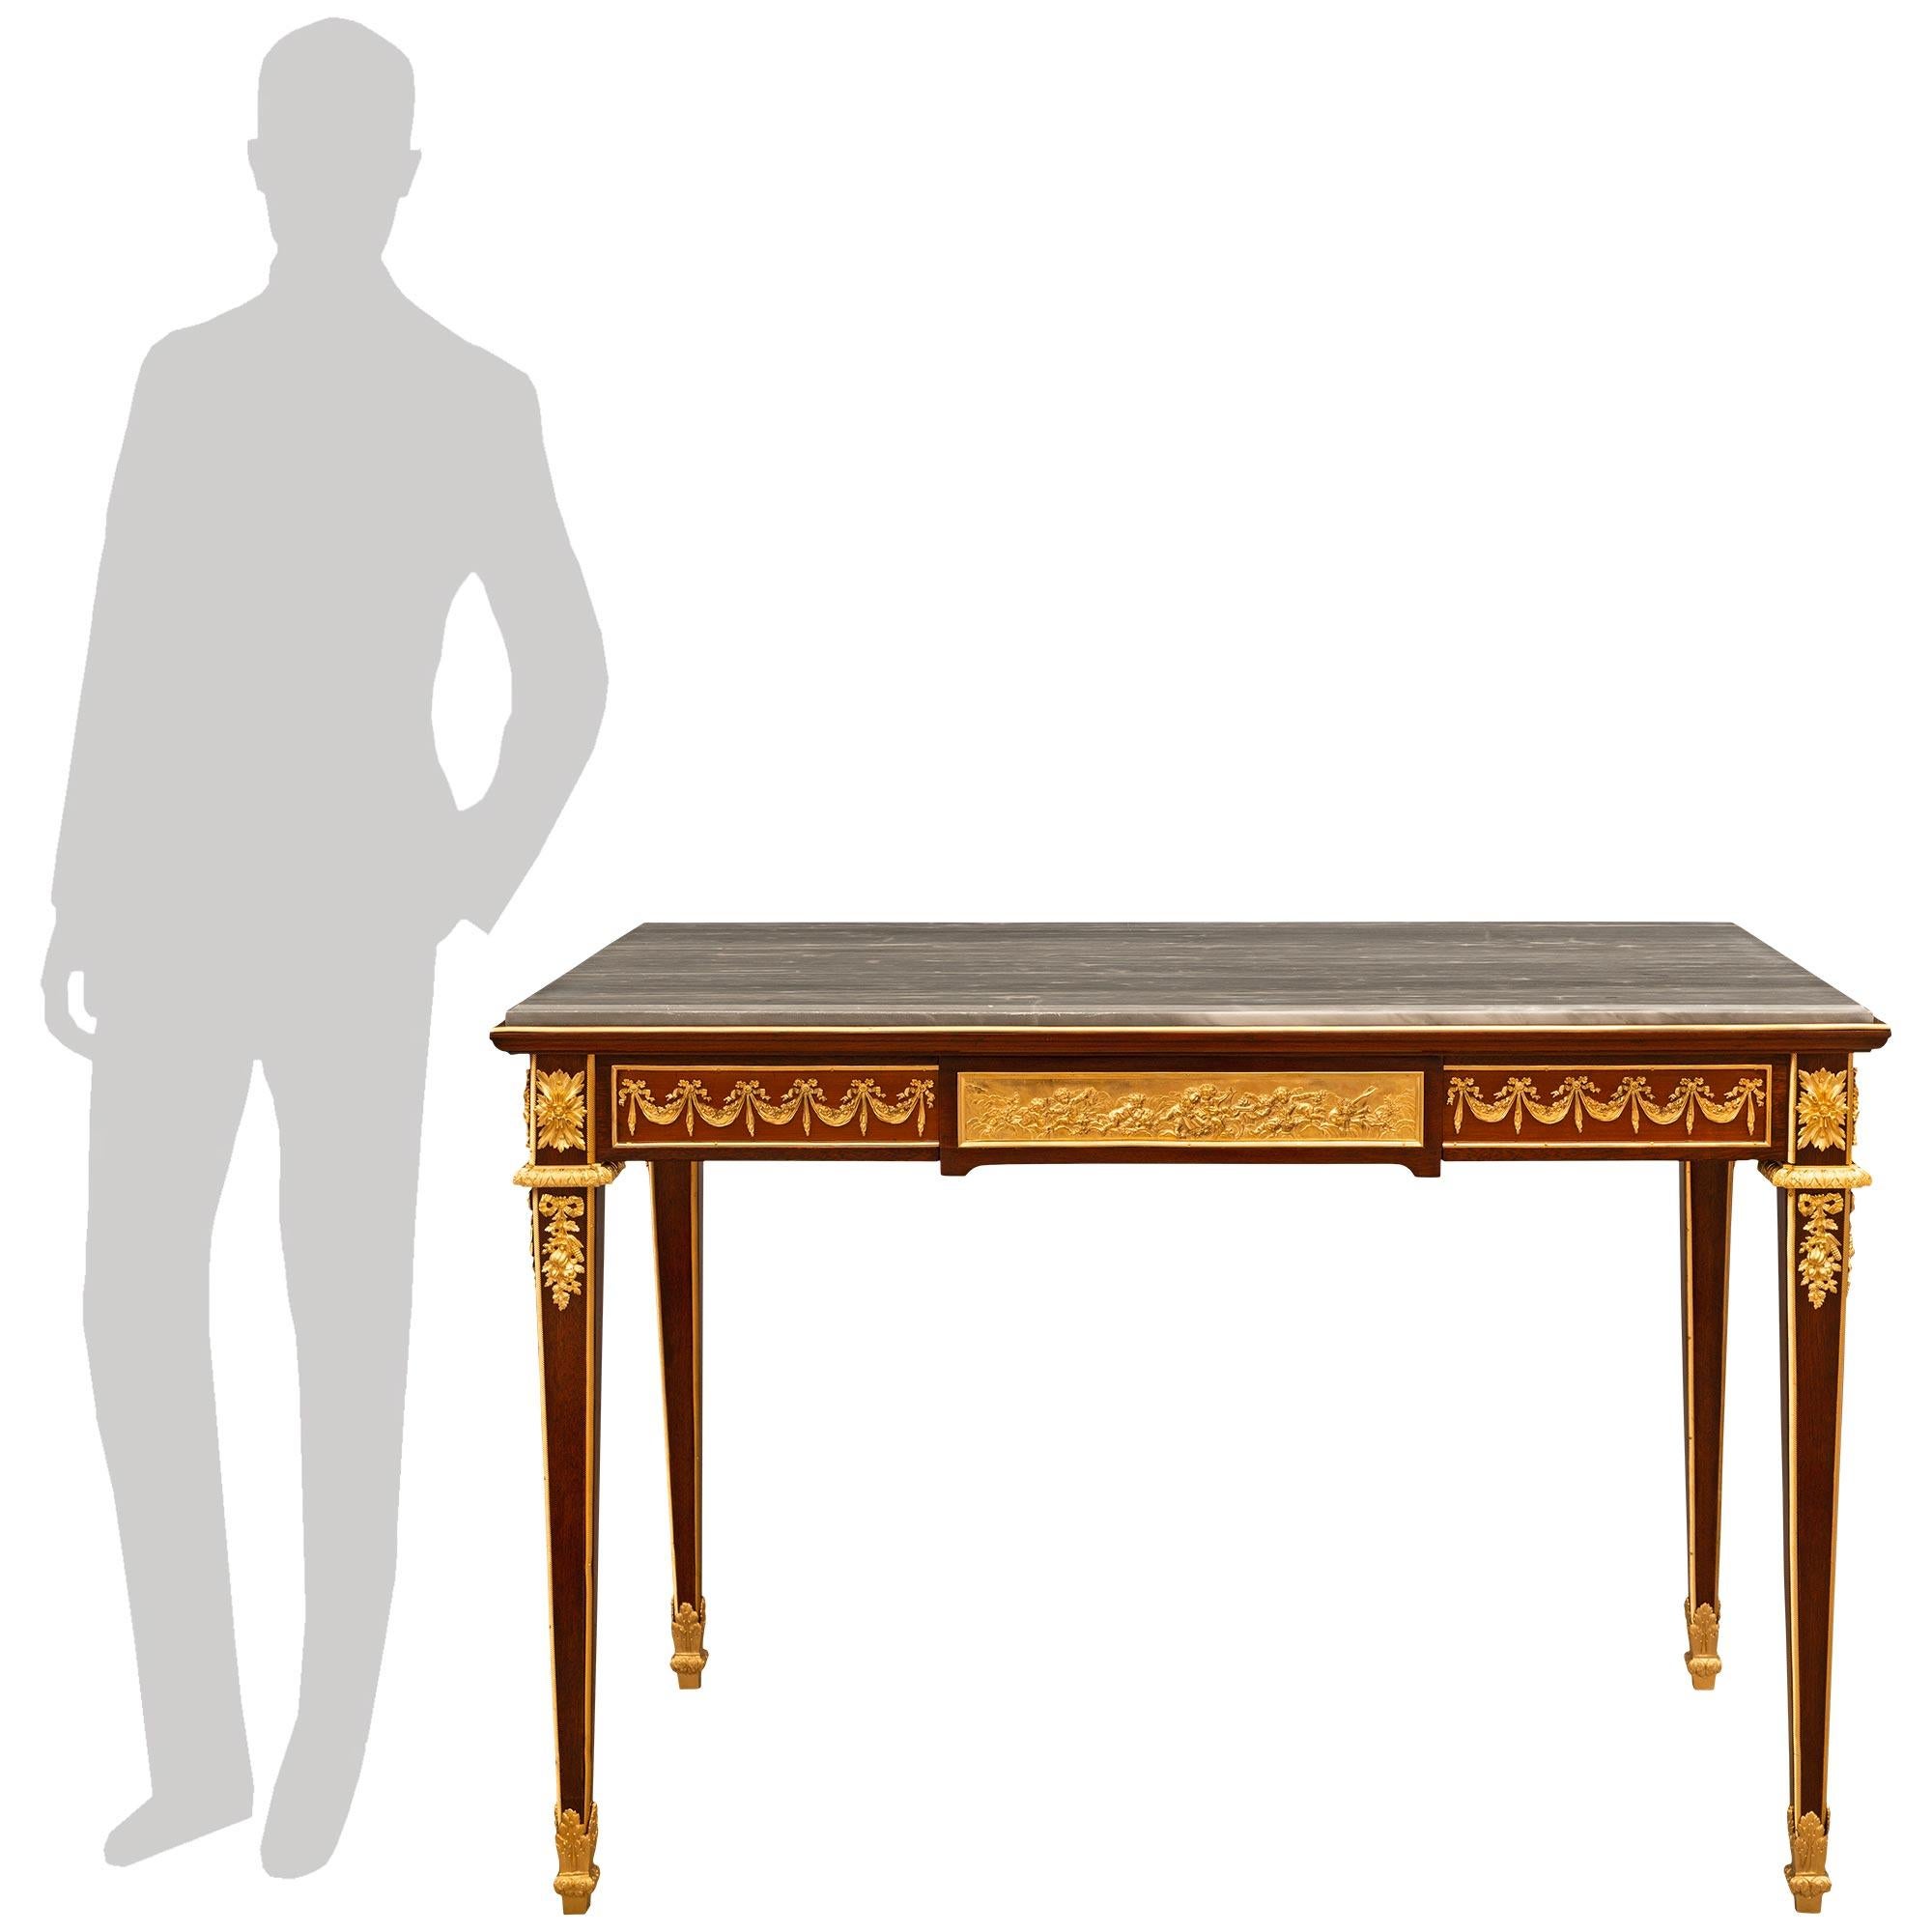 A stunning and most decorative French 19th century Louis XVI st. Mahogany, Ormolu, and Gris St. Anne marble center table/desk, attributed to François Linke. This wonderful single drawer rectangular center table is raised on four square tapered legs